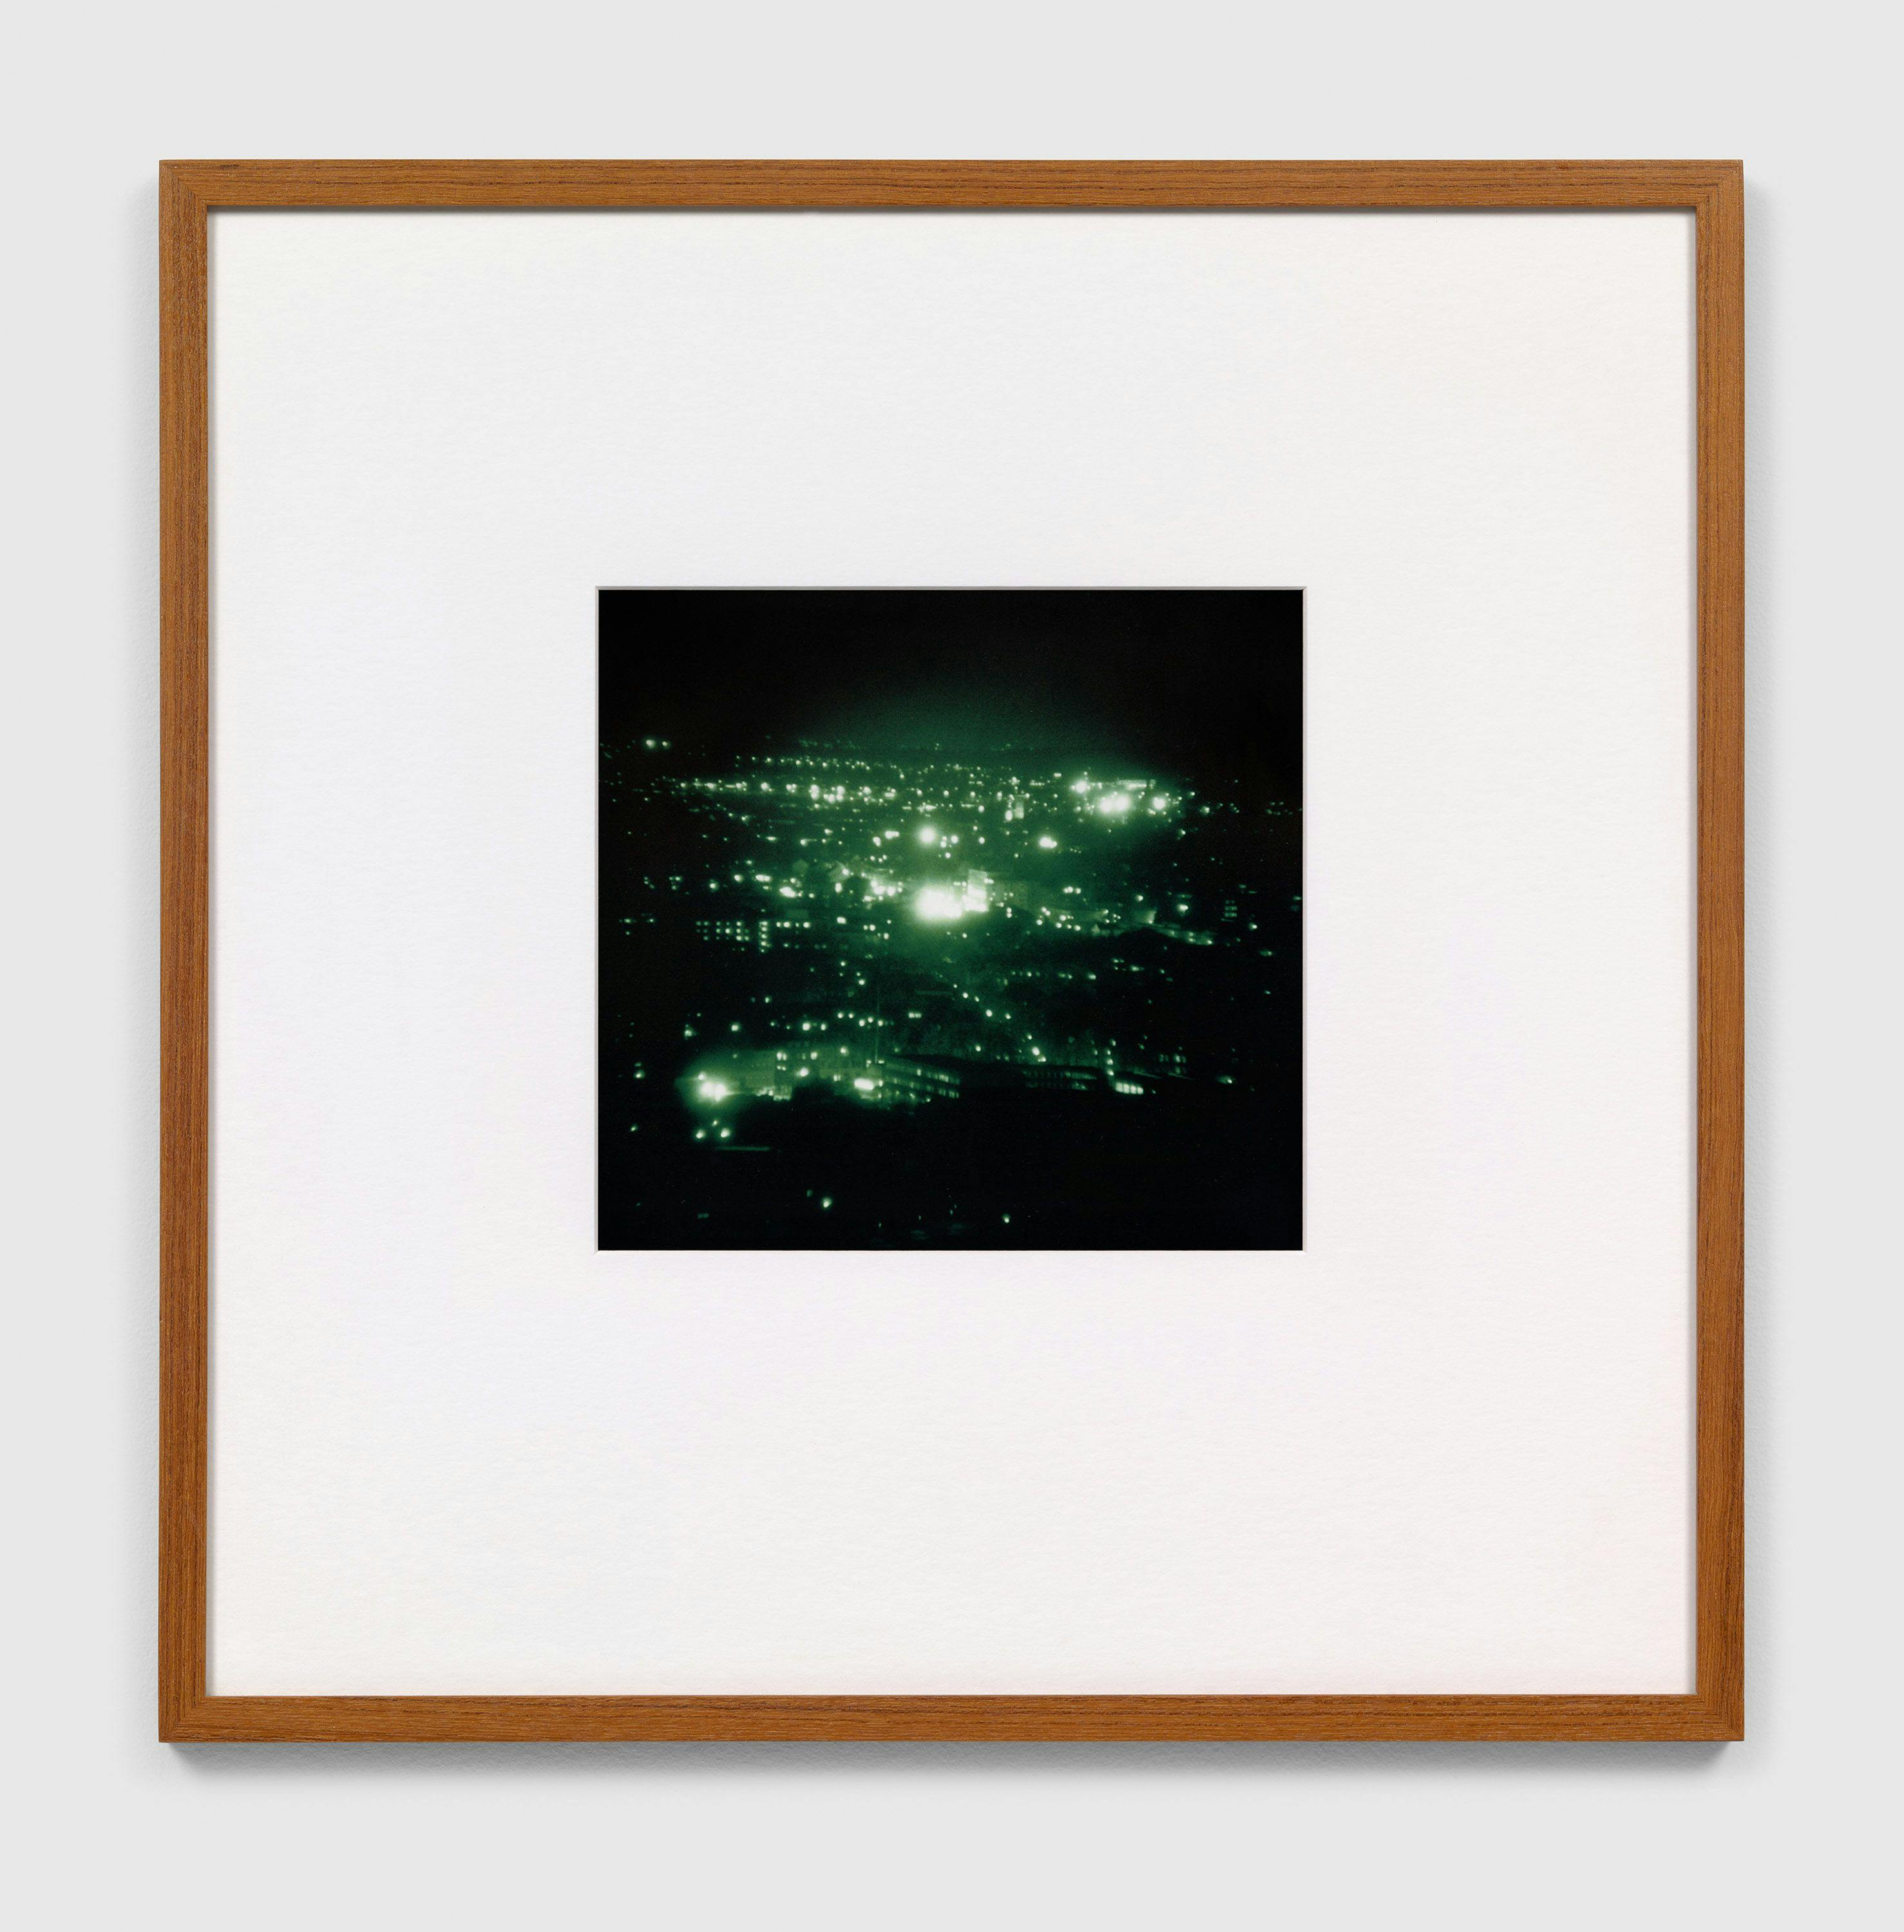 A photograph by Thomas Ruff, titled Nacht 20 I, dated 1992.